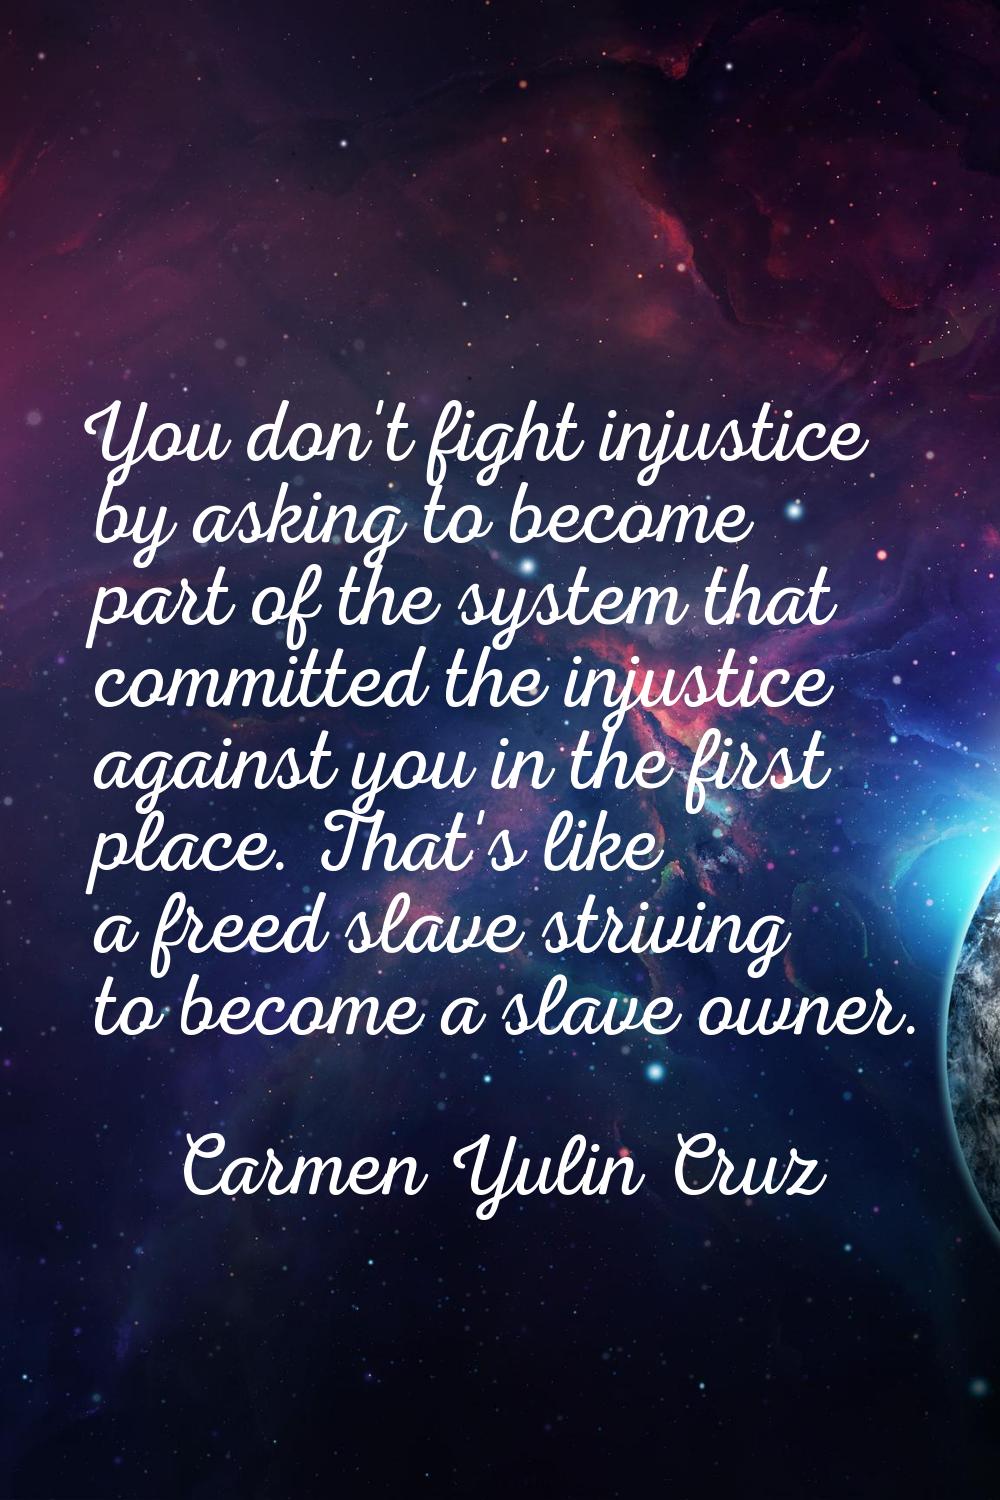 You don't fight injustice by asking to become part of the system that committed the injustice again